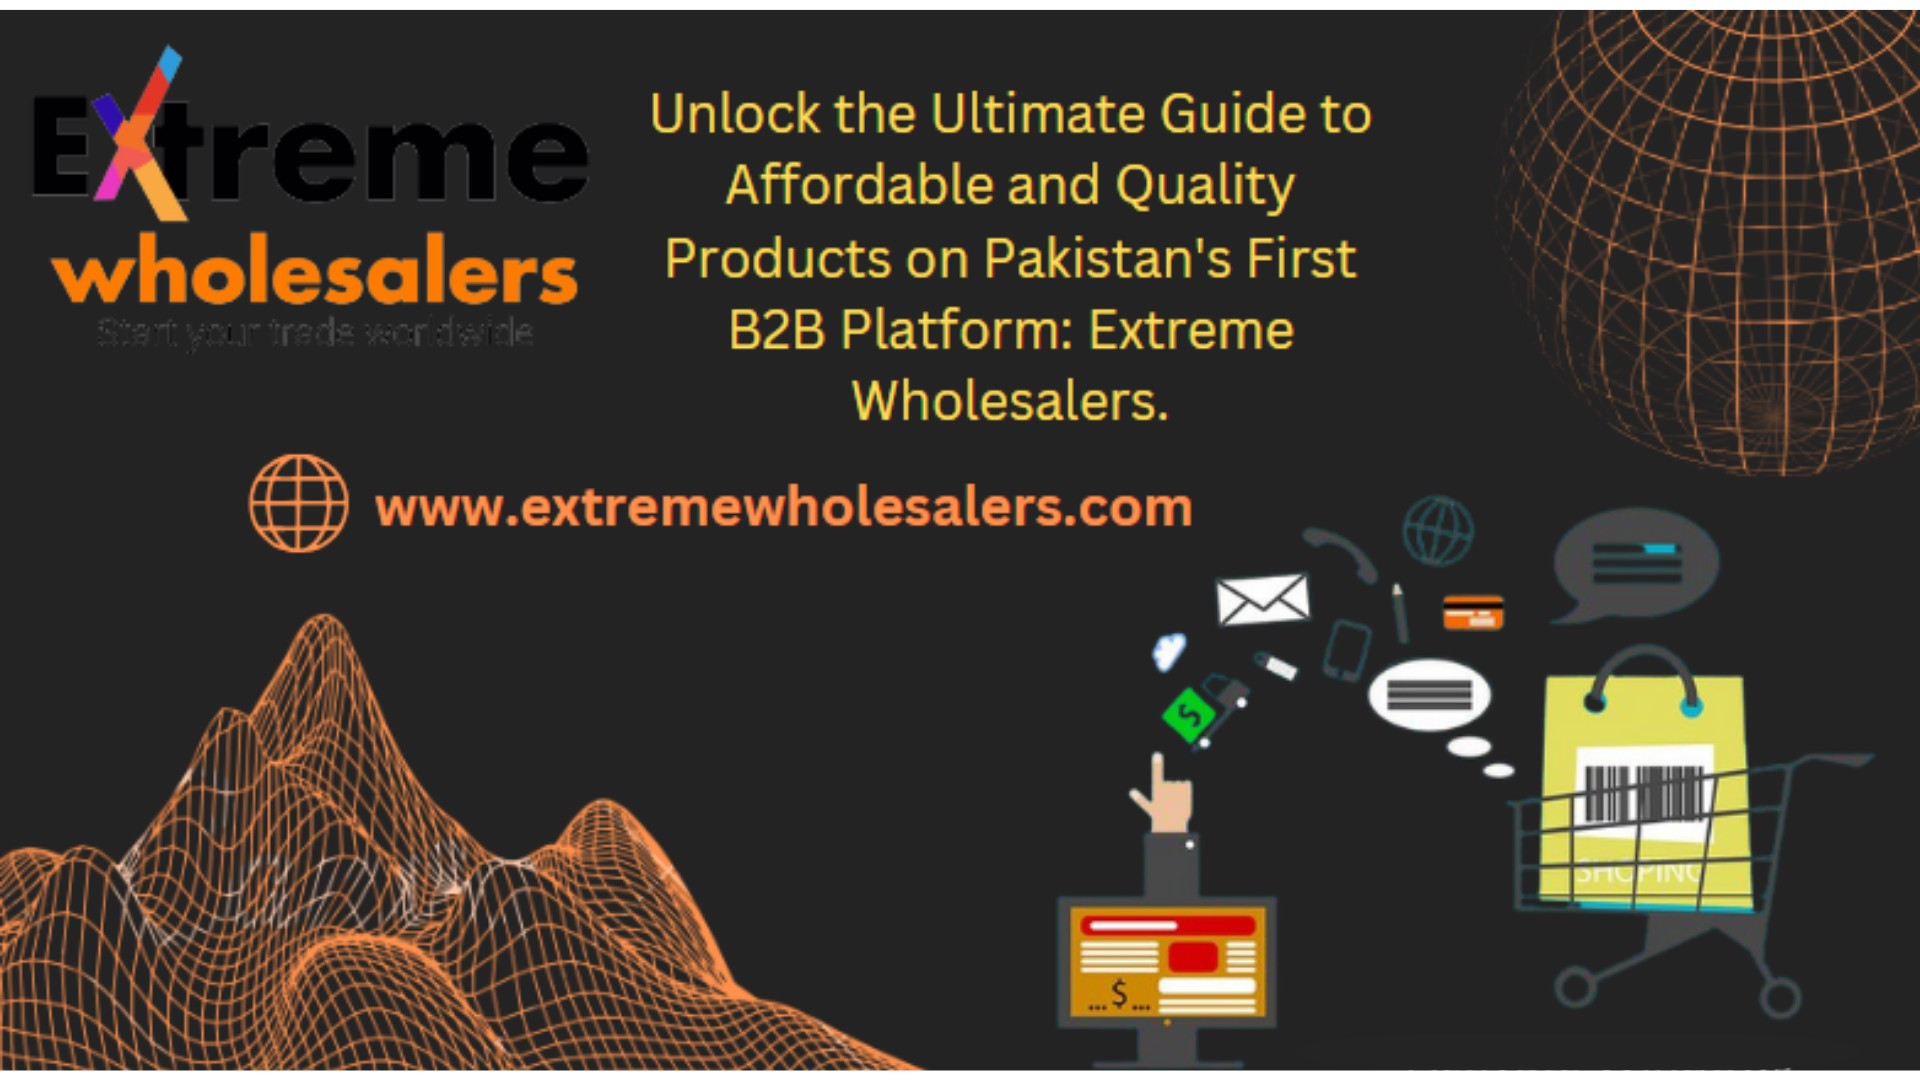 Get More for Less: The Benefits of Shopping with Extreme Wholesalers